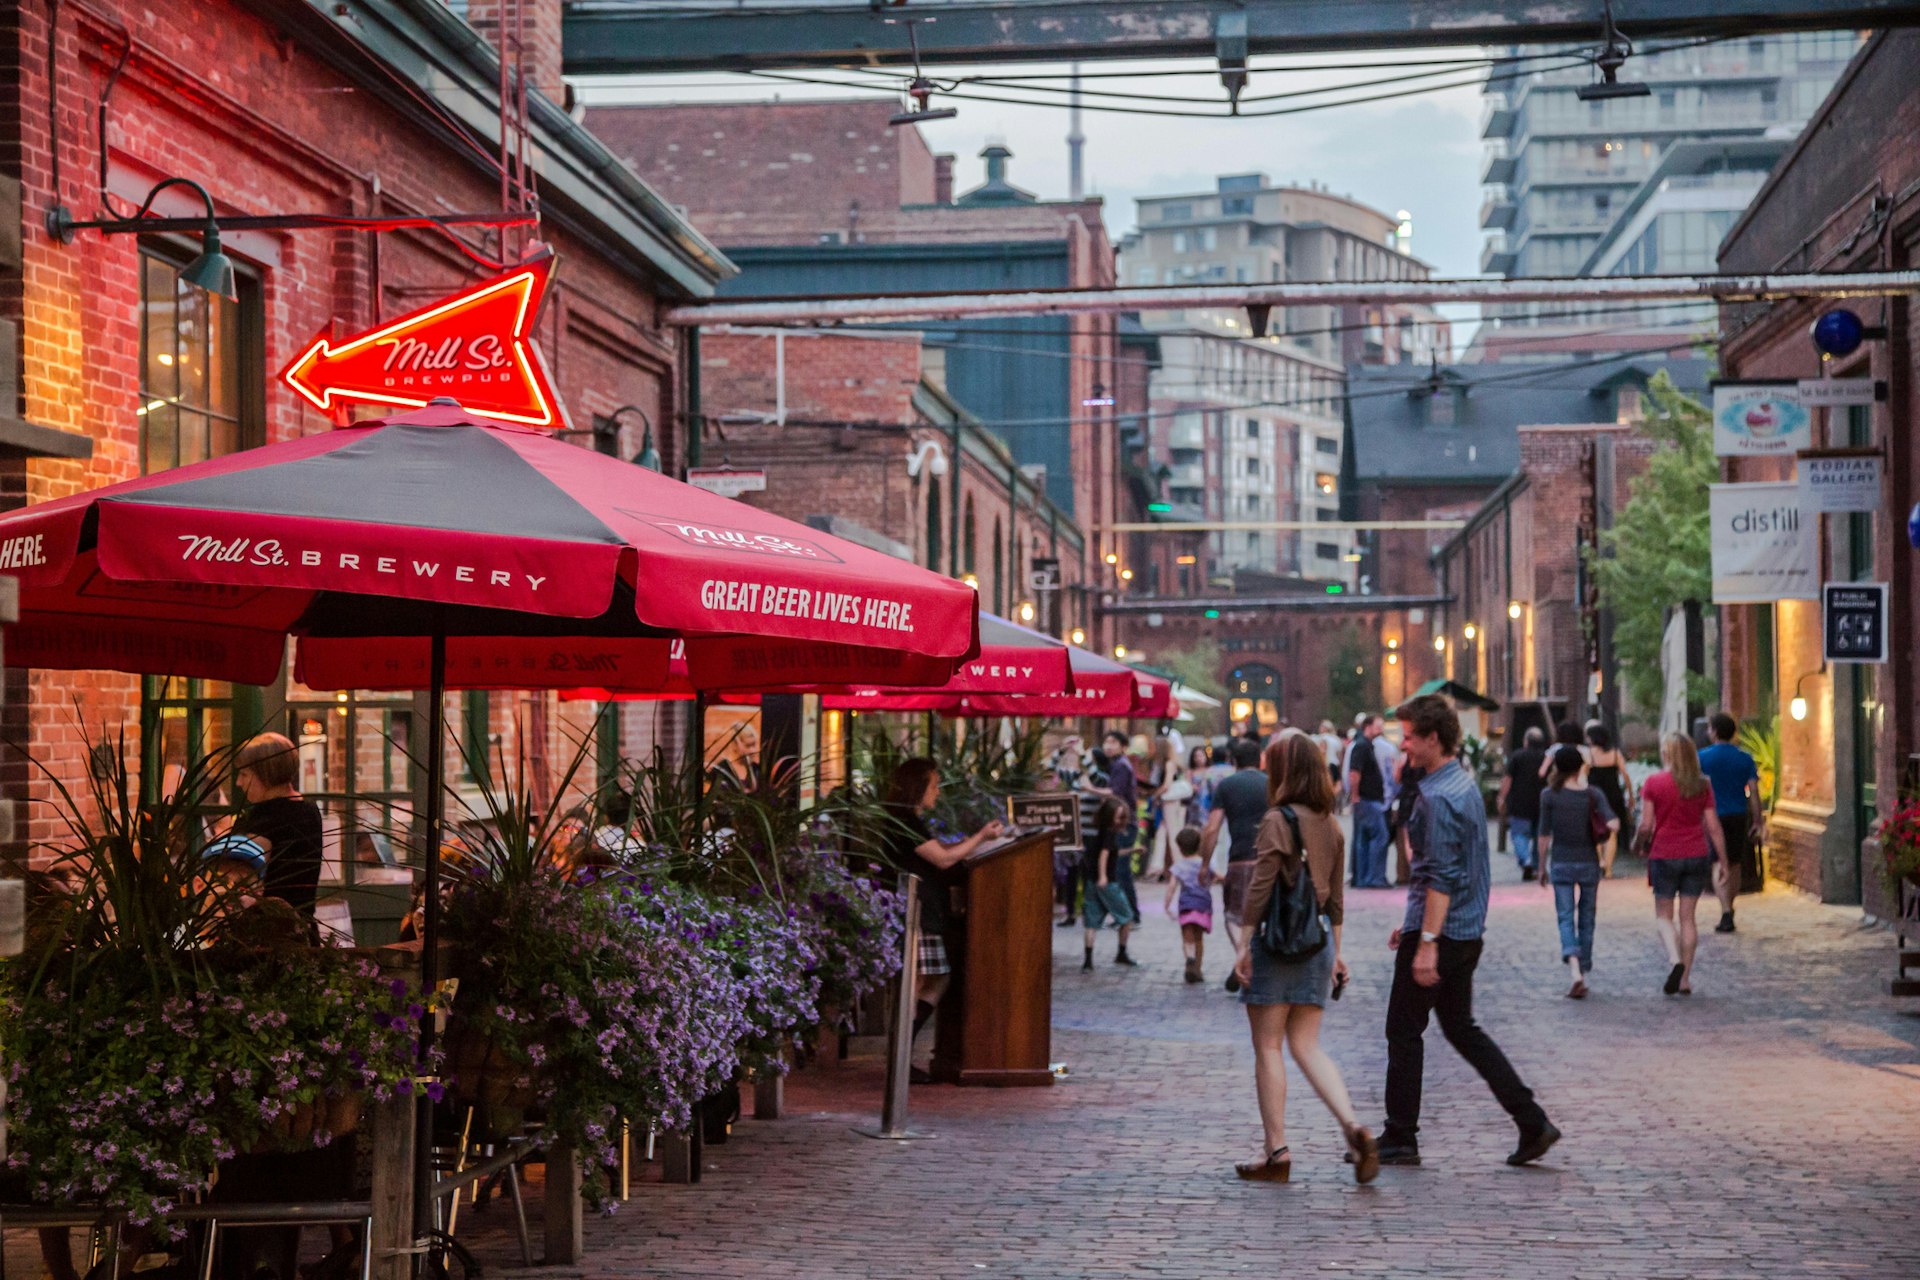 This photo shows a summer scene where district restaurants and bars have patio's set up allowing patrons to sit outdoors and enjoy a night out eating and people watching.